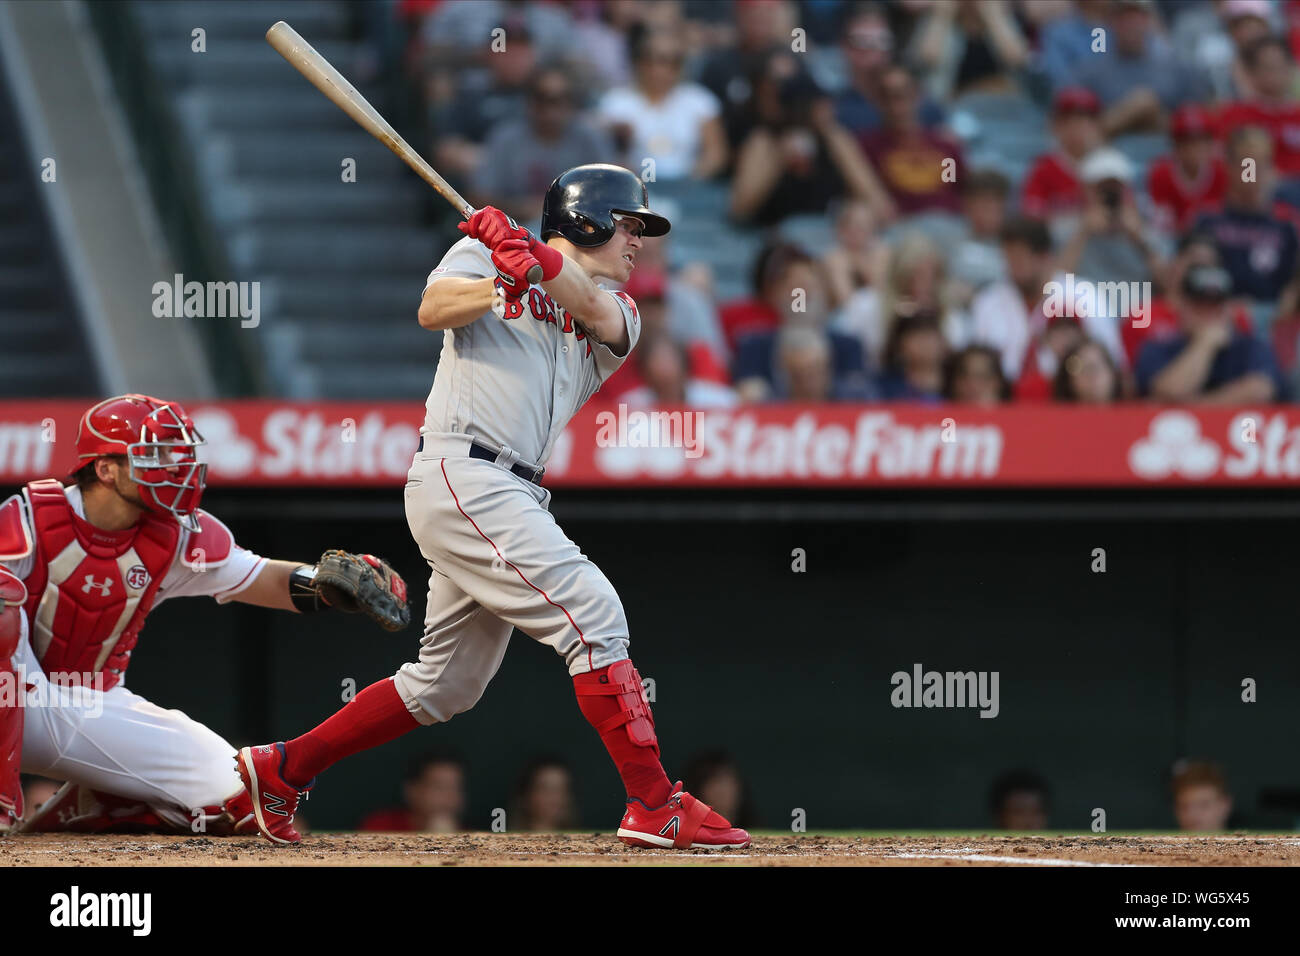 Anaheim, USA. 31st Aug, 2019. August 31, 2019: Boston Red Sox second baseman Brock Holt (12) singles during the game between the Boston Red Sox and the Los Angeles Angels of Anaheim at Angel Stadium in Anaheim, CA, (Photo by Peter Joneleit, Cal Sport Media) Credit: Cal Sport Media/Alamy Live News Stock Photo